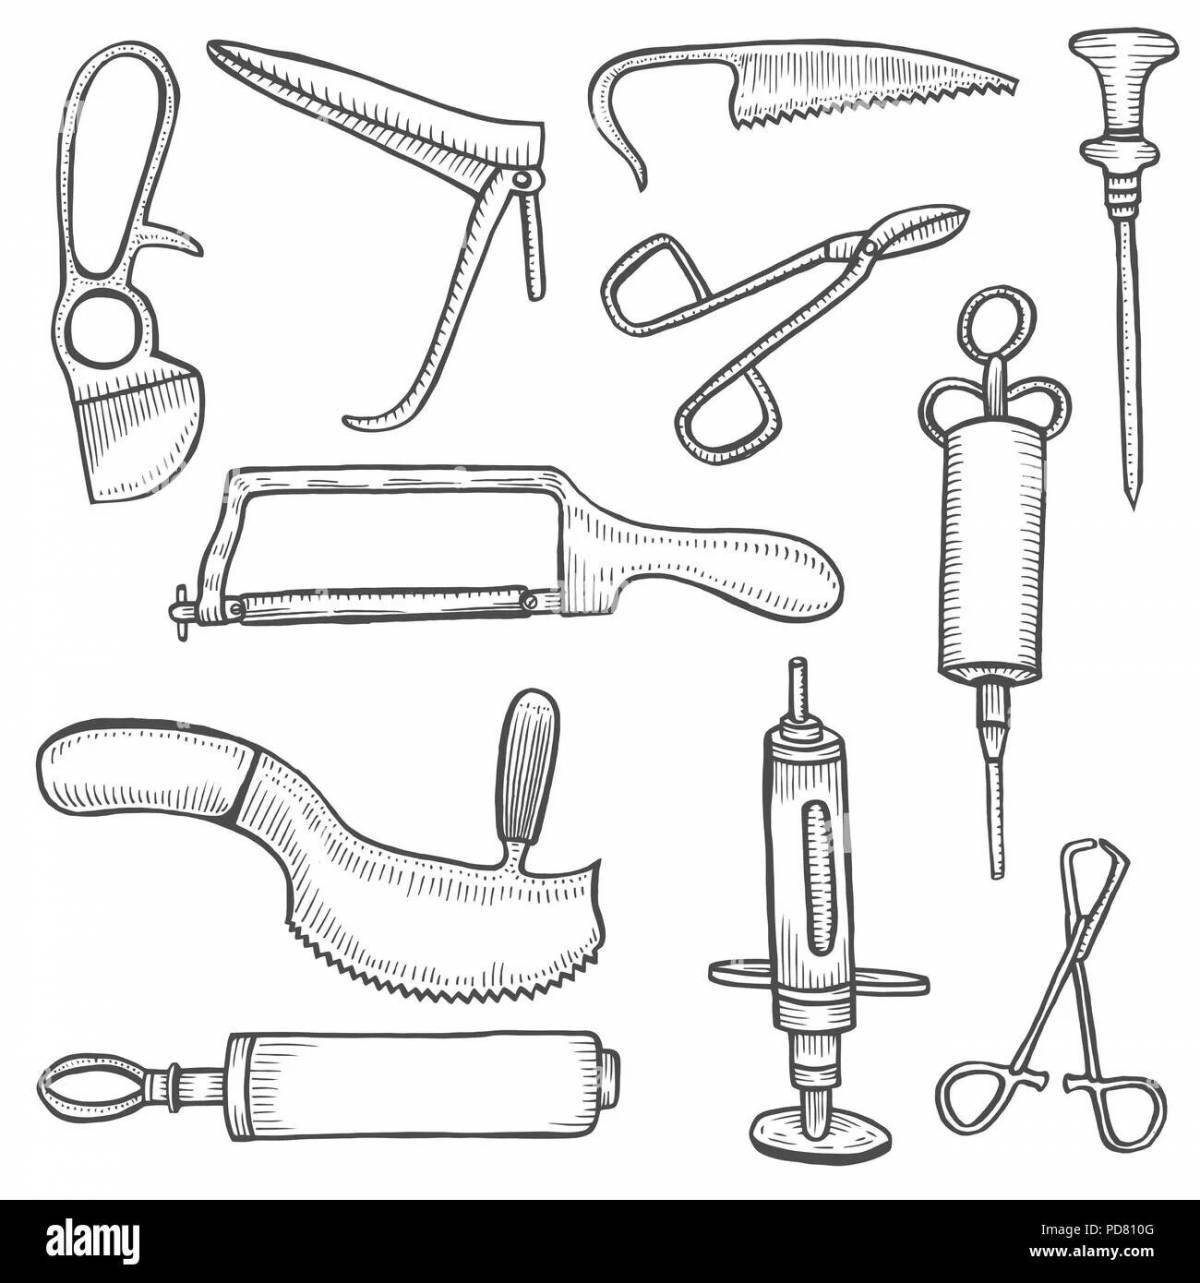 Adorable medical instruments coloring book